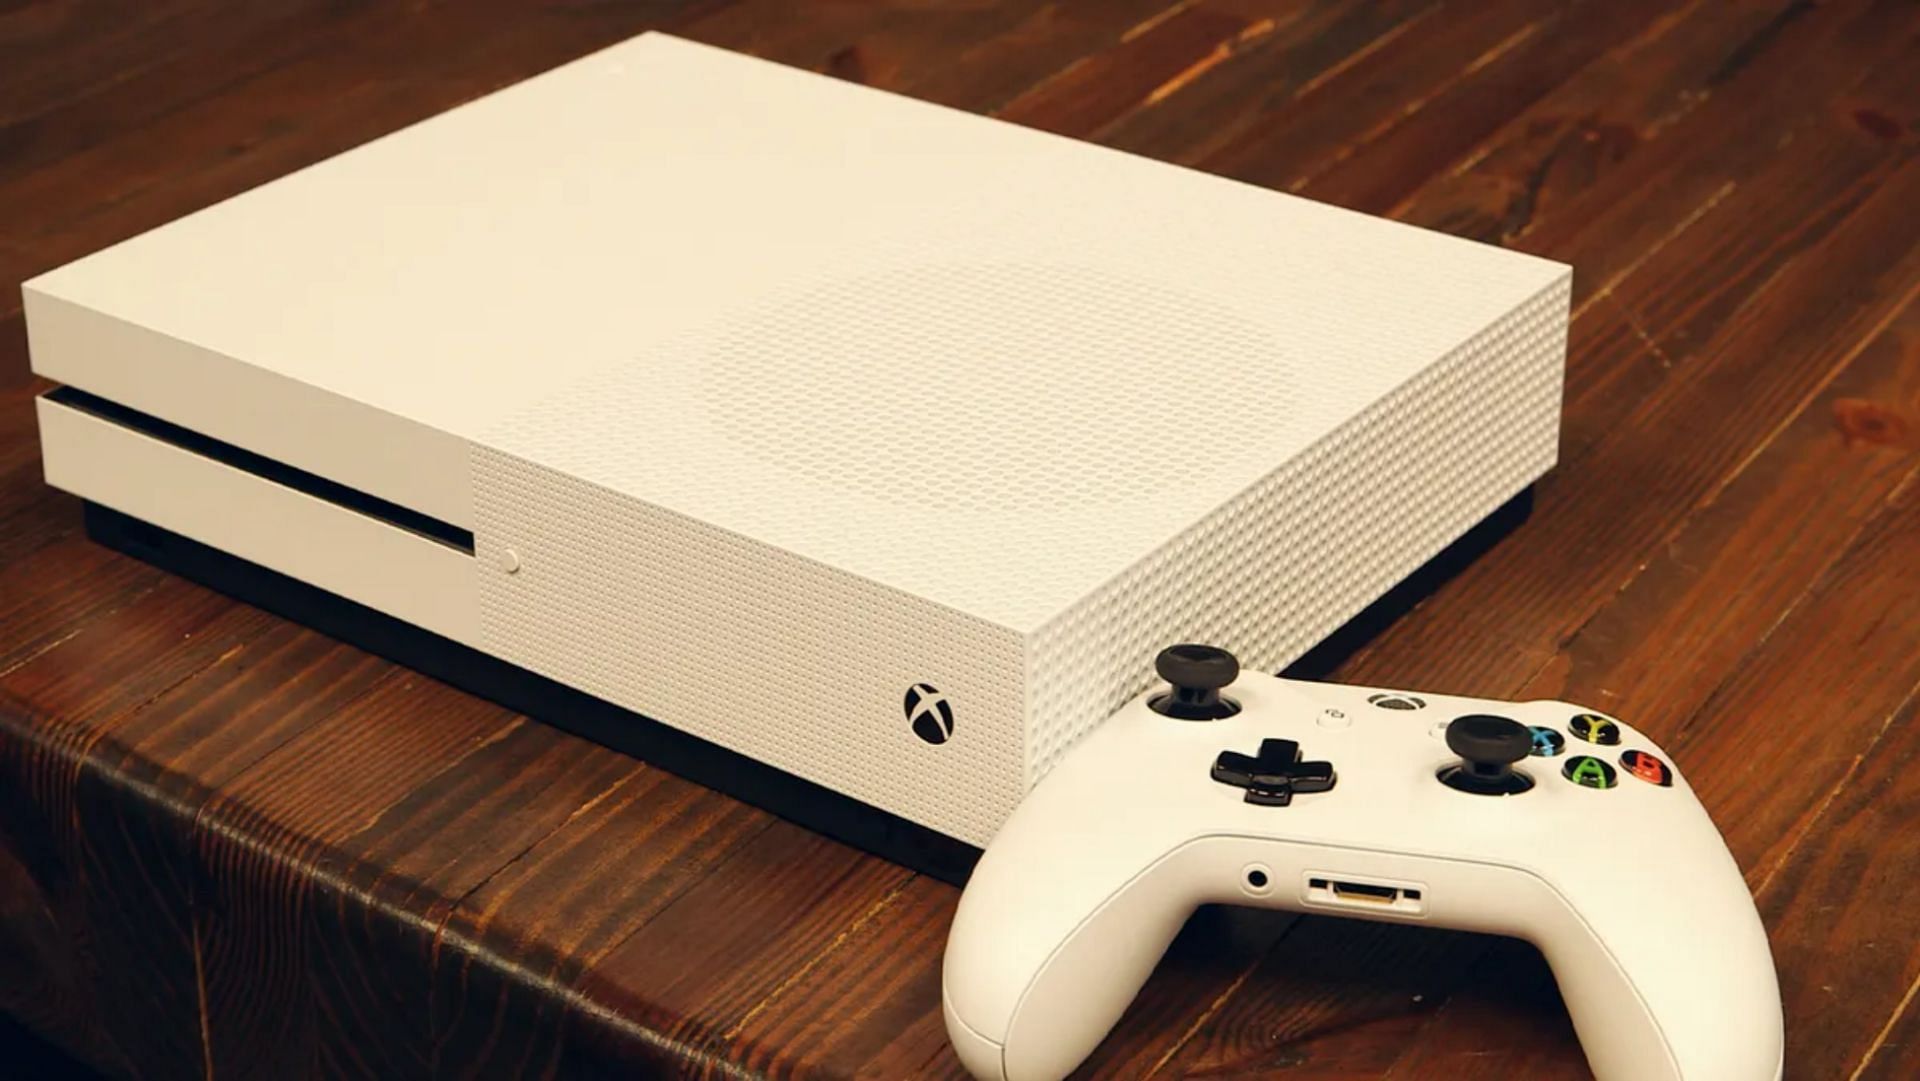 Xbox One has been a trusted console for Microsoft over the years (Image via CNET)